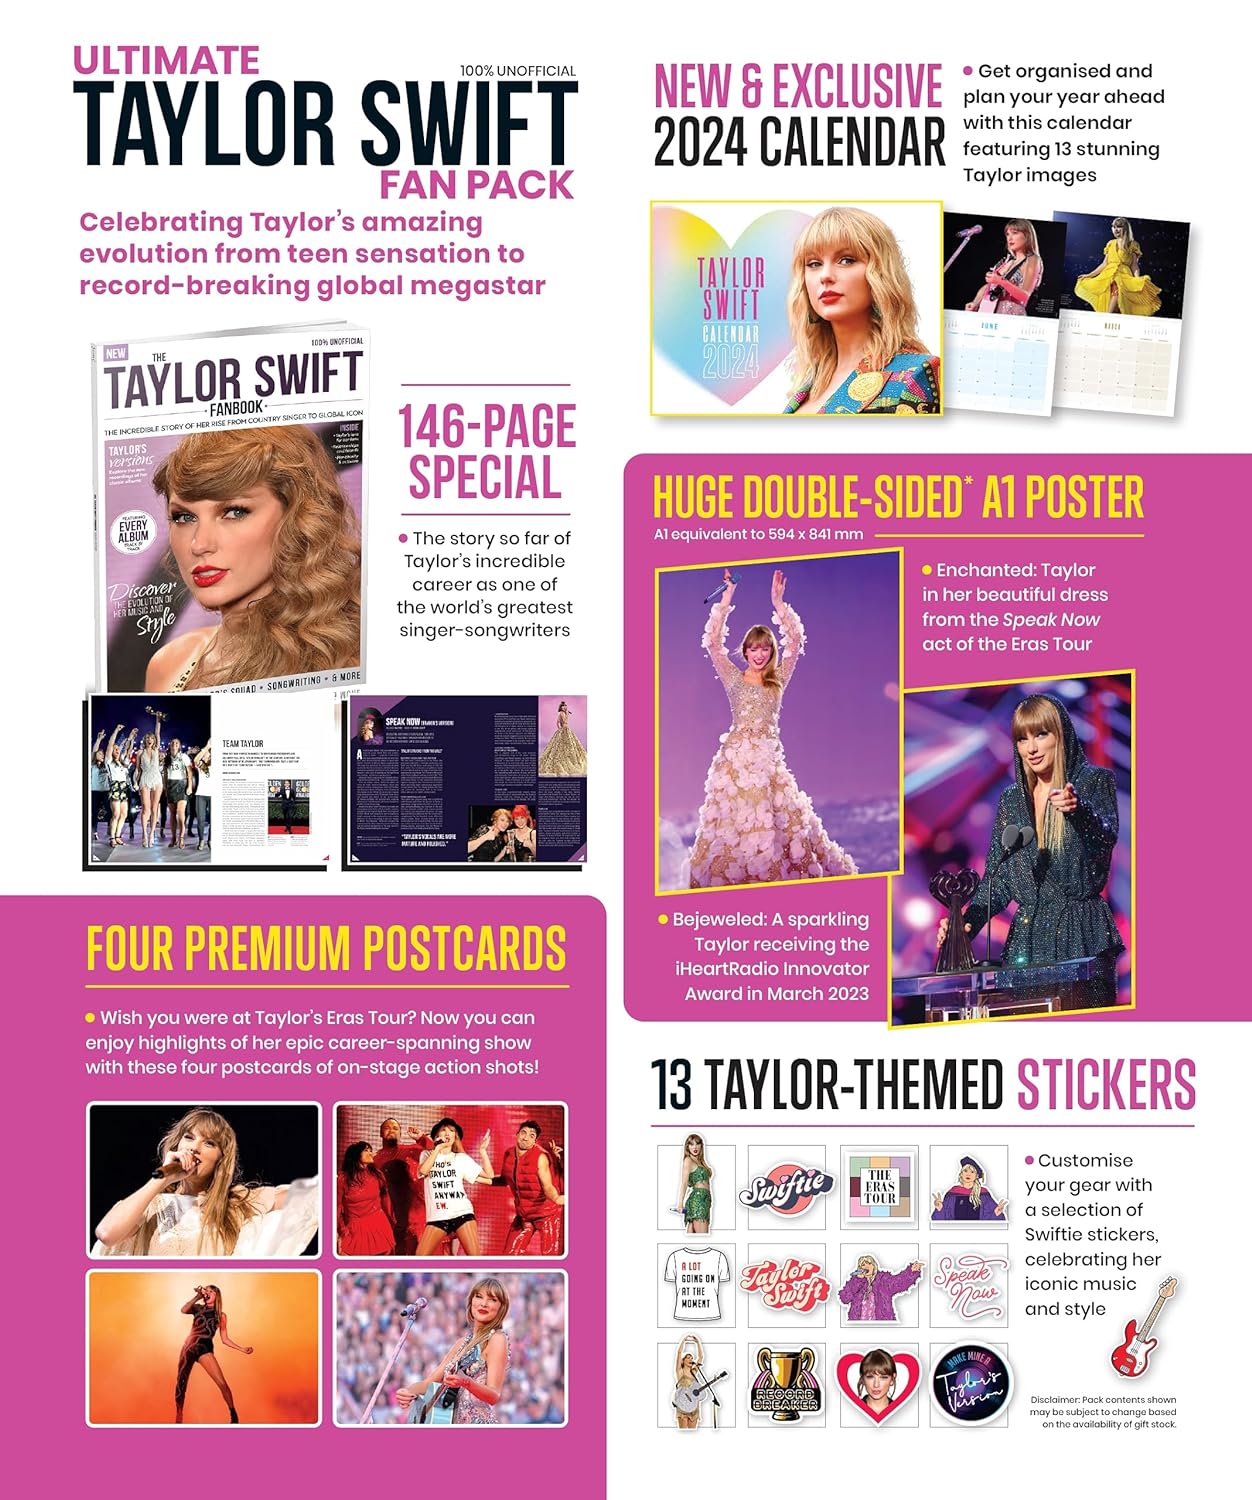 The Ultimate Taylor Swift Tour Fan Pack